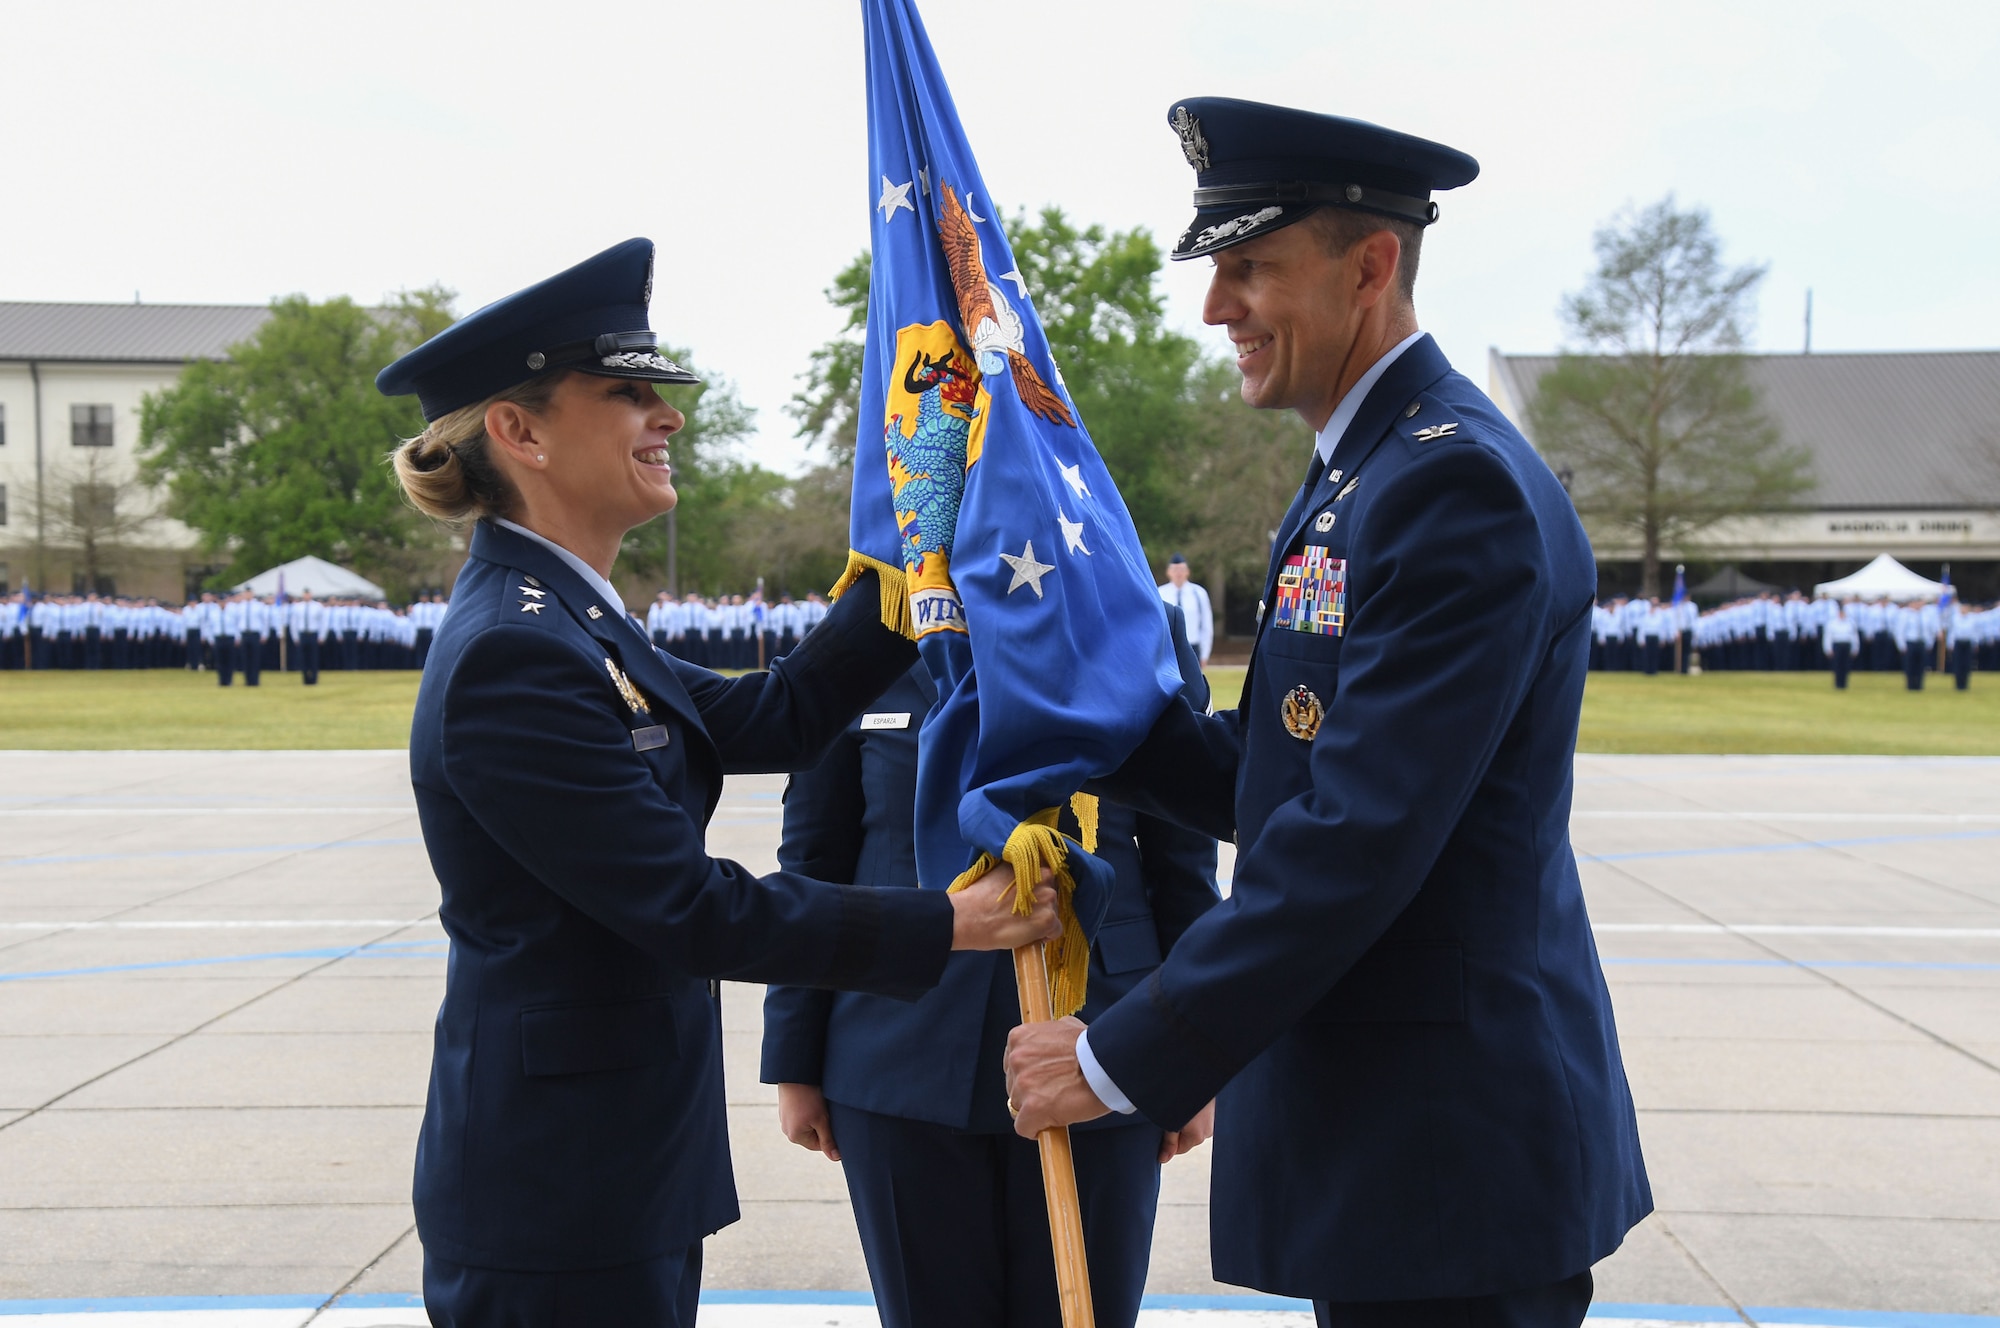 U.S. Air Force Maj. Gen. Michele Edmondson, Second Air Force commander, passes the guidon to Col. Billy Pope, 81st Training Wing commander, during an assumption of command ceremony on the Levitow Training Support Facility drill pad at Keesler Air Force Base, Mississippi, March 23, 2023.